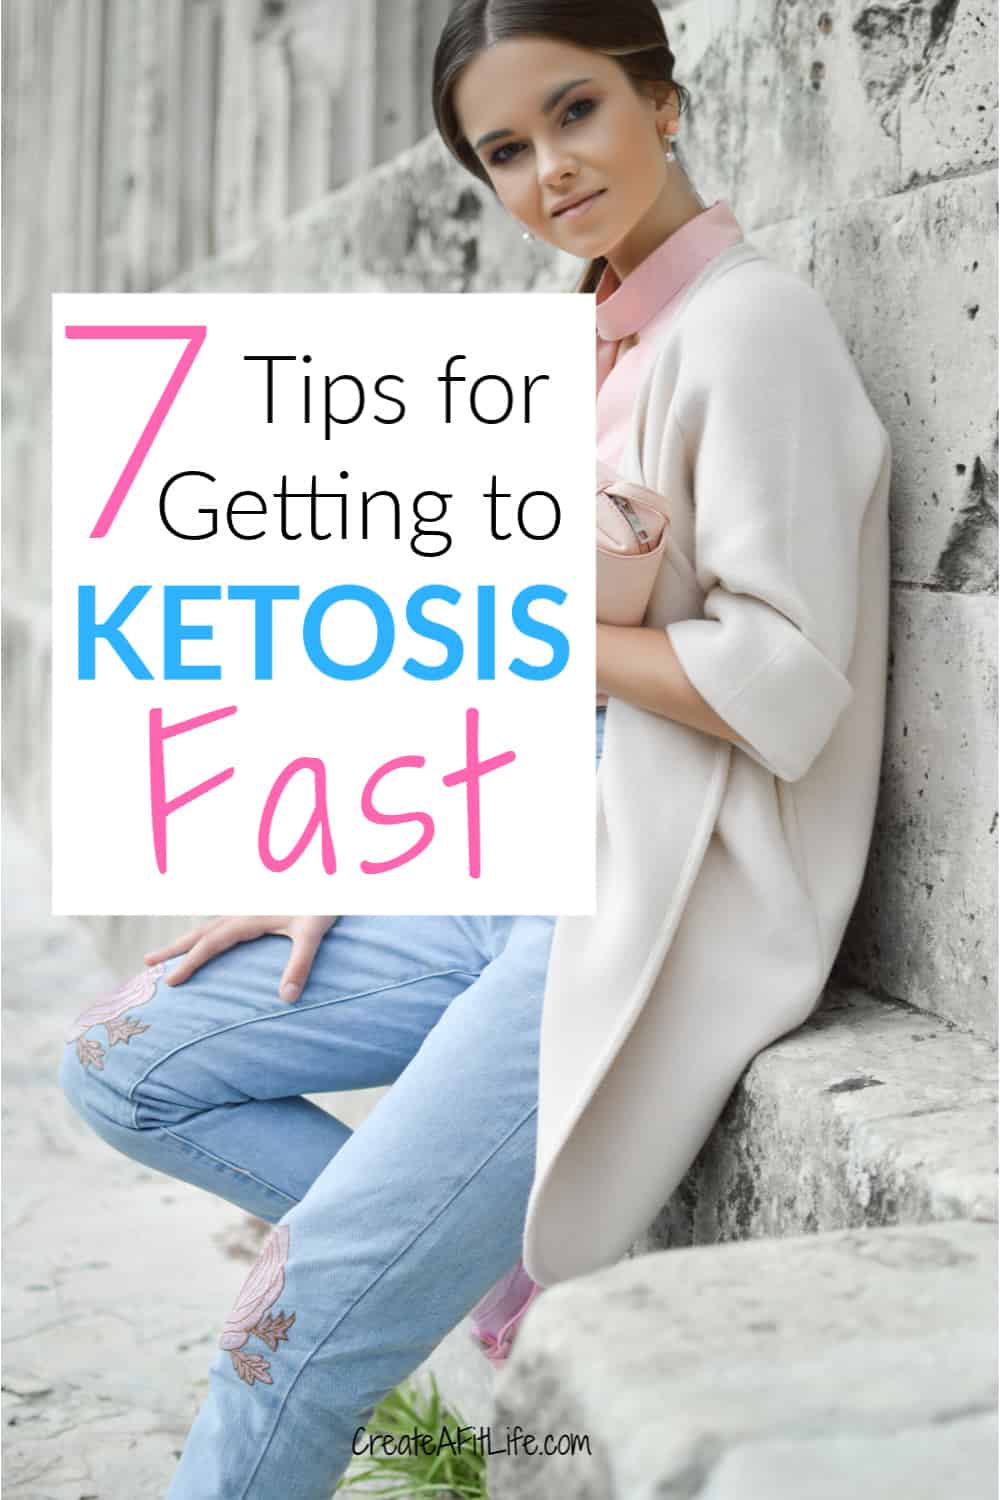 How to Get to Ketosis Fast